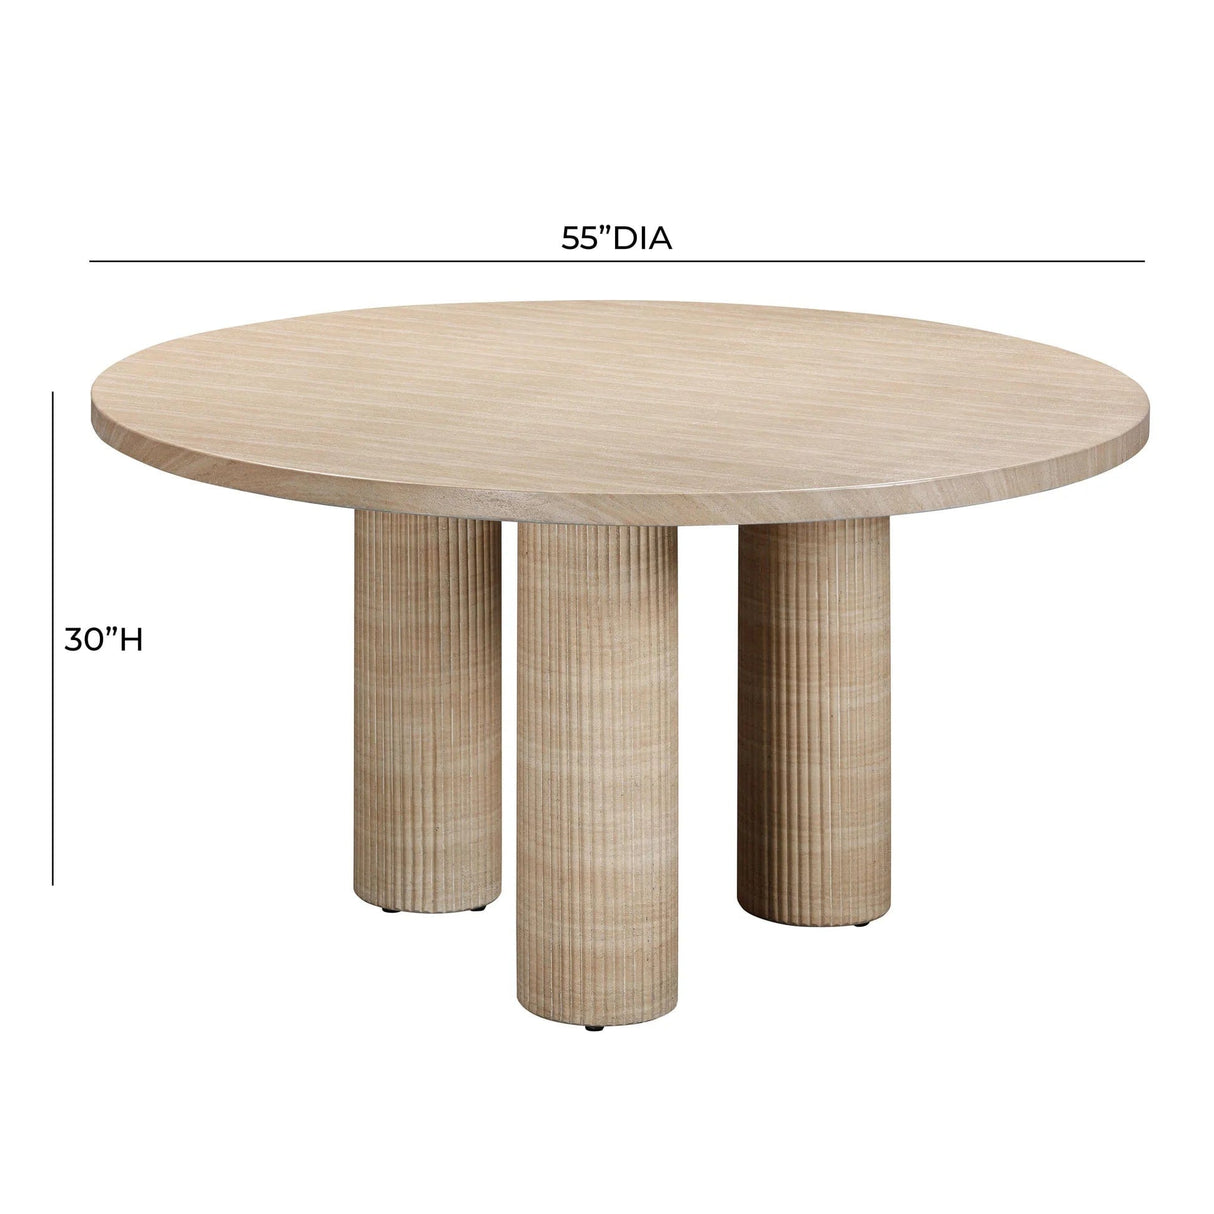 Candelabra Home Patti Textured Faux Travertine Indoor/Outdoor Dining Table Dining Tables TOV-O54276